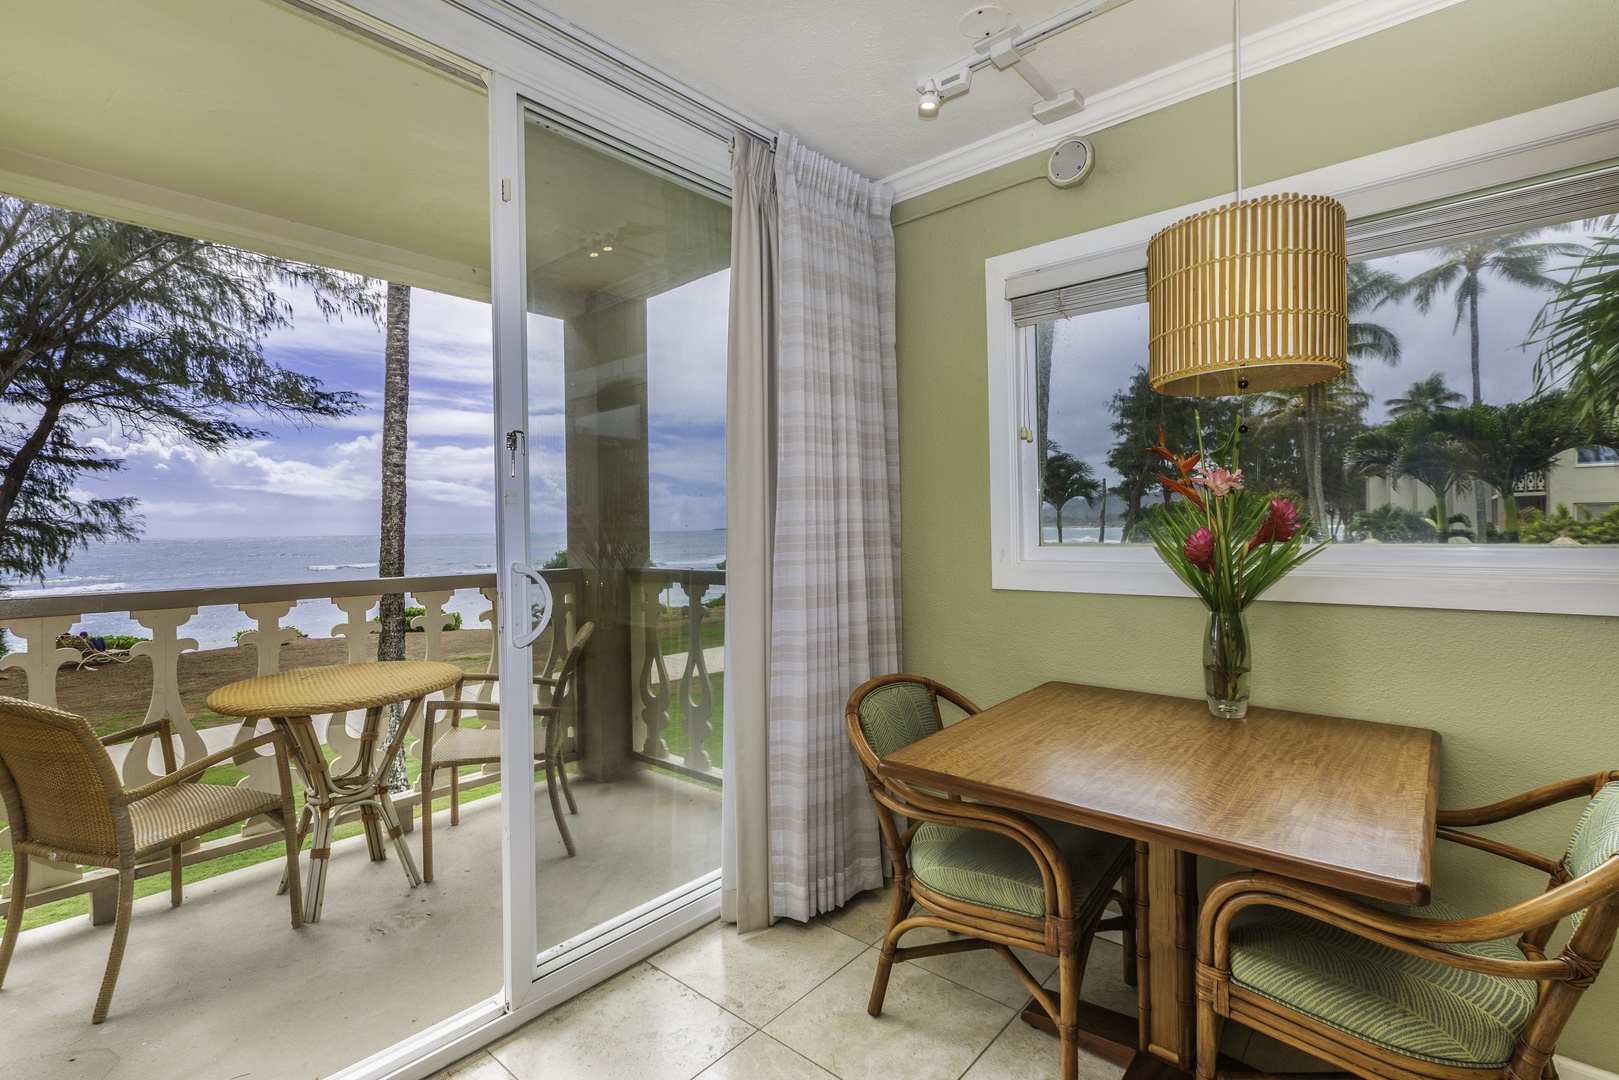 Kapa'a Vacation Rentals, Islander on the Beach #232 - unobstructed views of the ocean located less than fifty (50) yards from your private Lanai